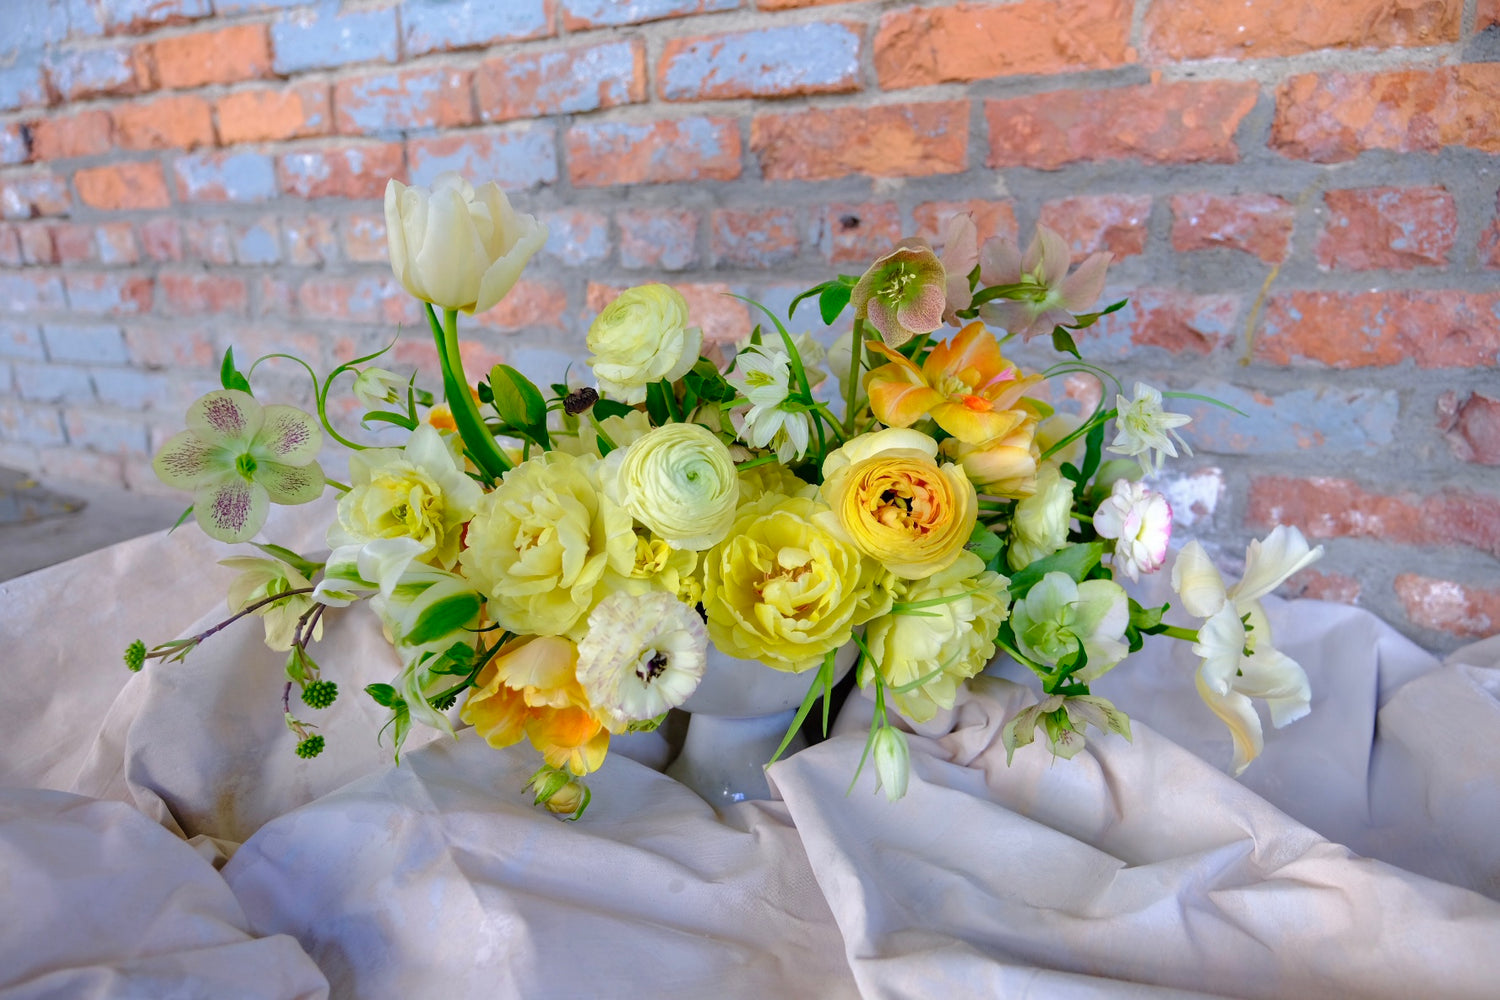 Ranunculus, carnations, tulipsand orchids work together as a creative freedom. By focusing on color combinations, we can also place emphasis on shapes and textures.